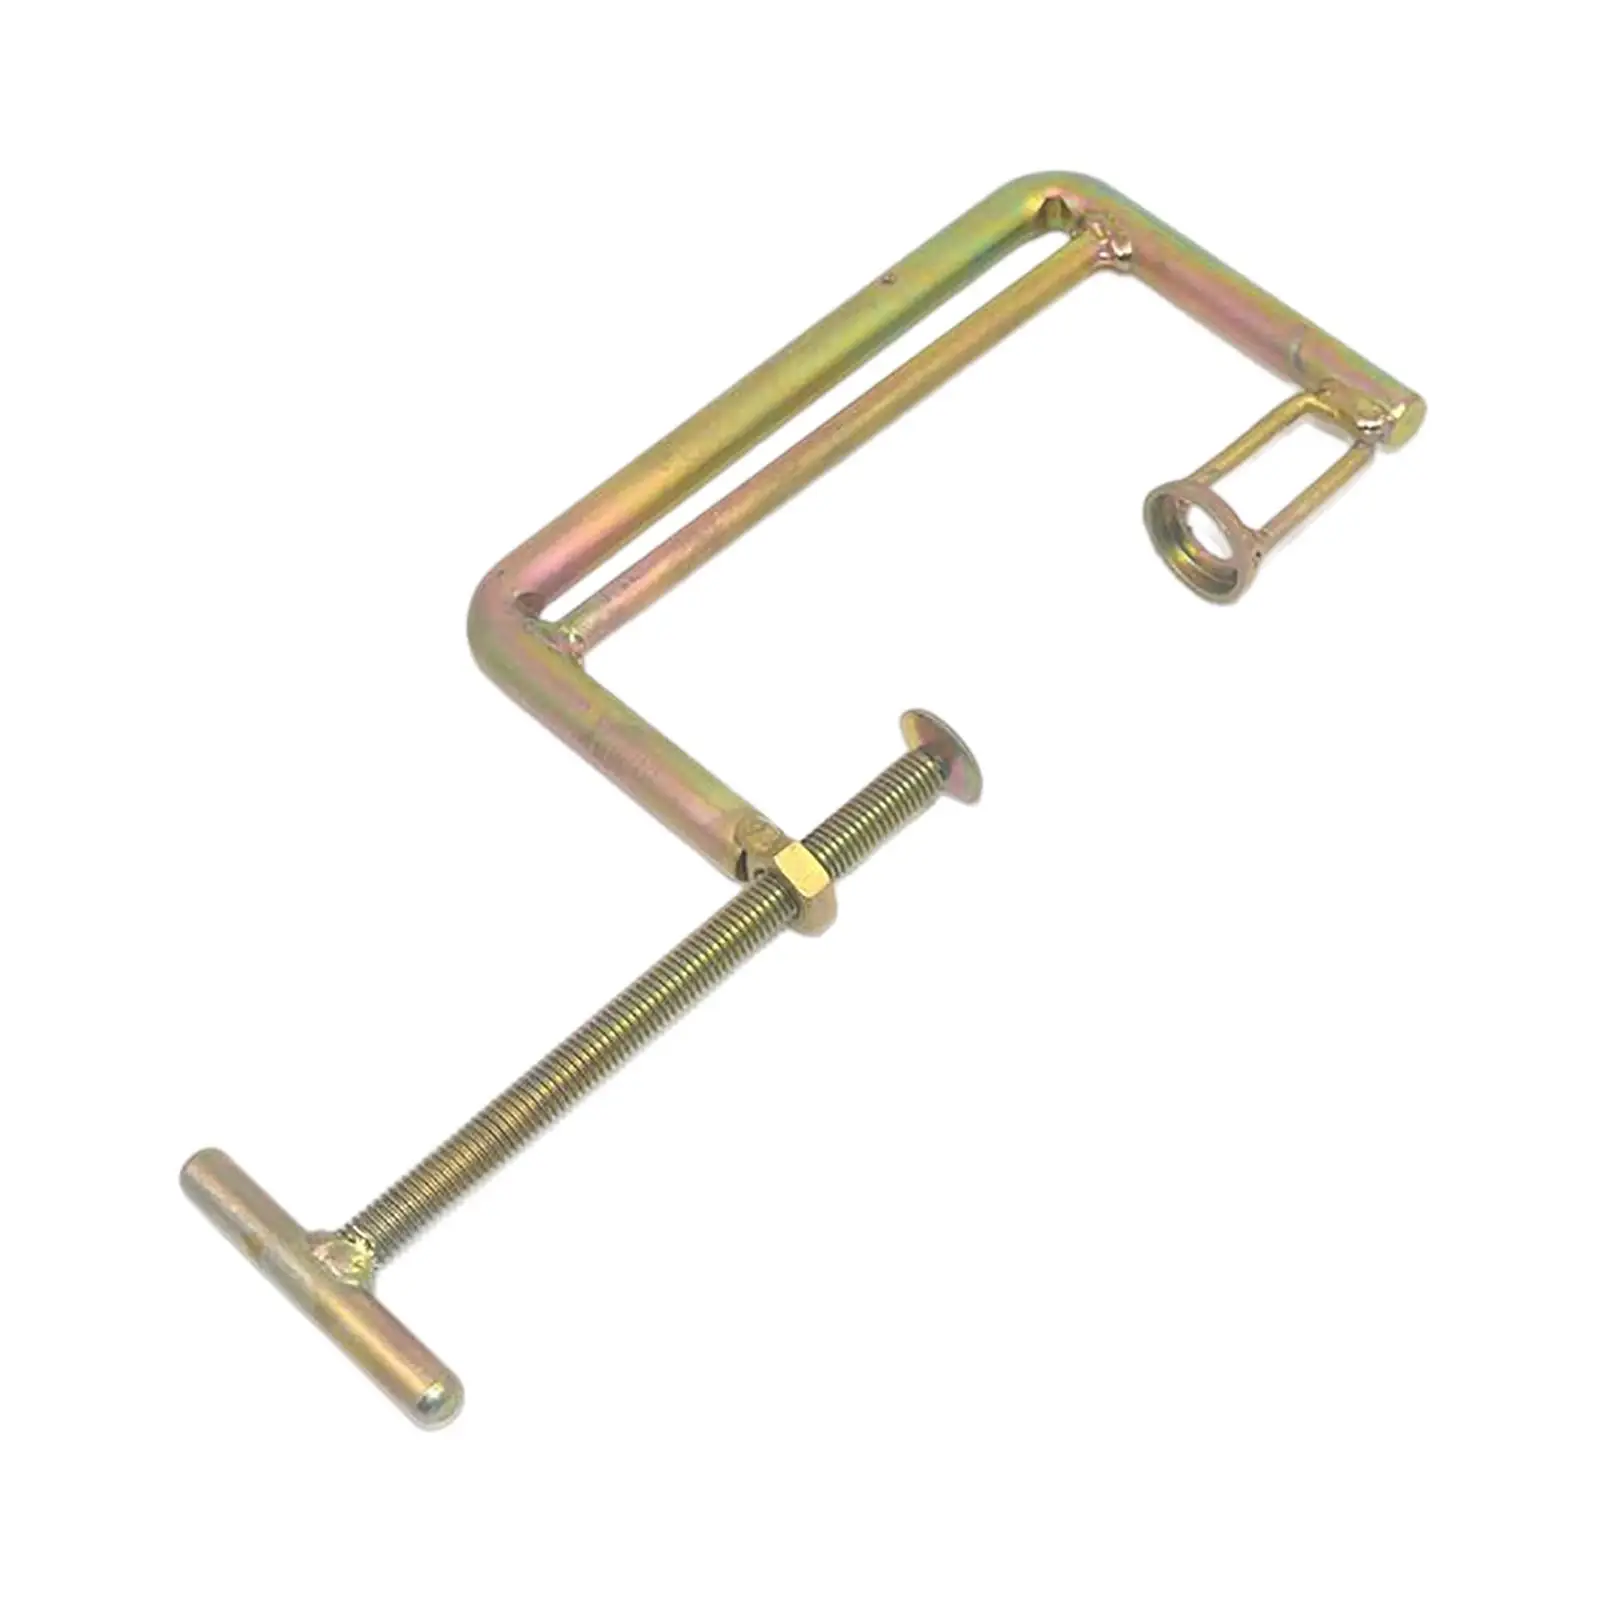 Valve Spring Clamps Aluminum Durable Professional Reliable Maintenance Spring Clamp Tool for Small Engines Car Accessory